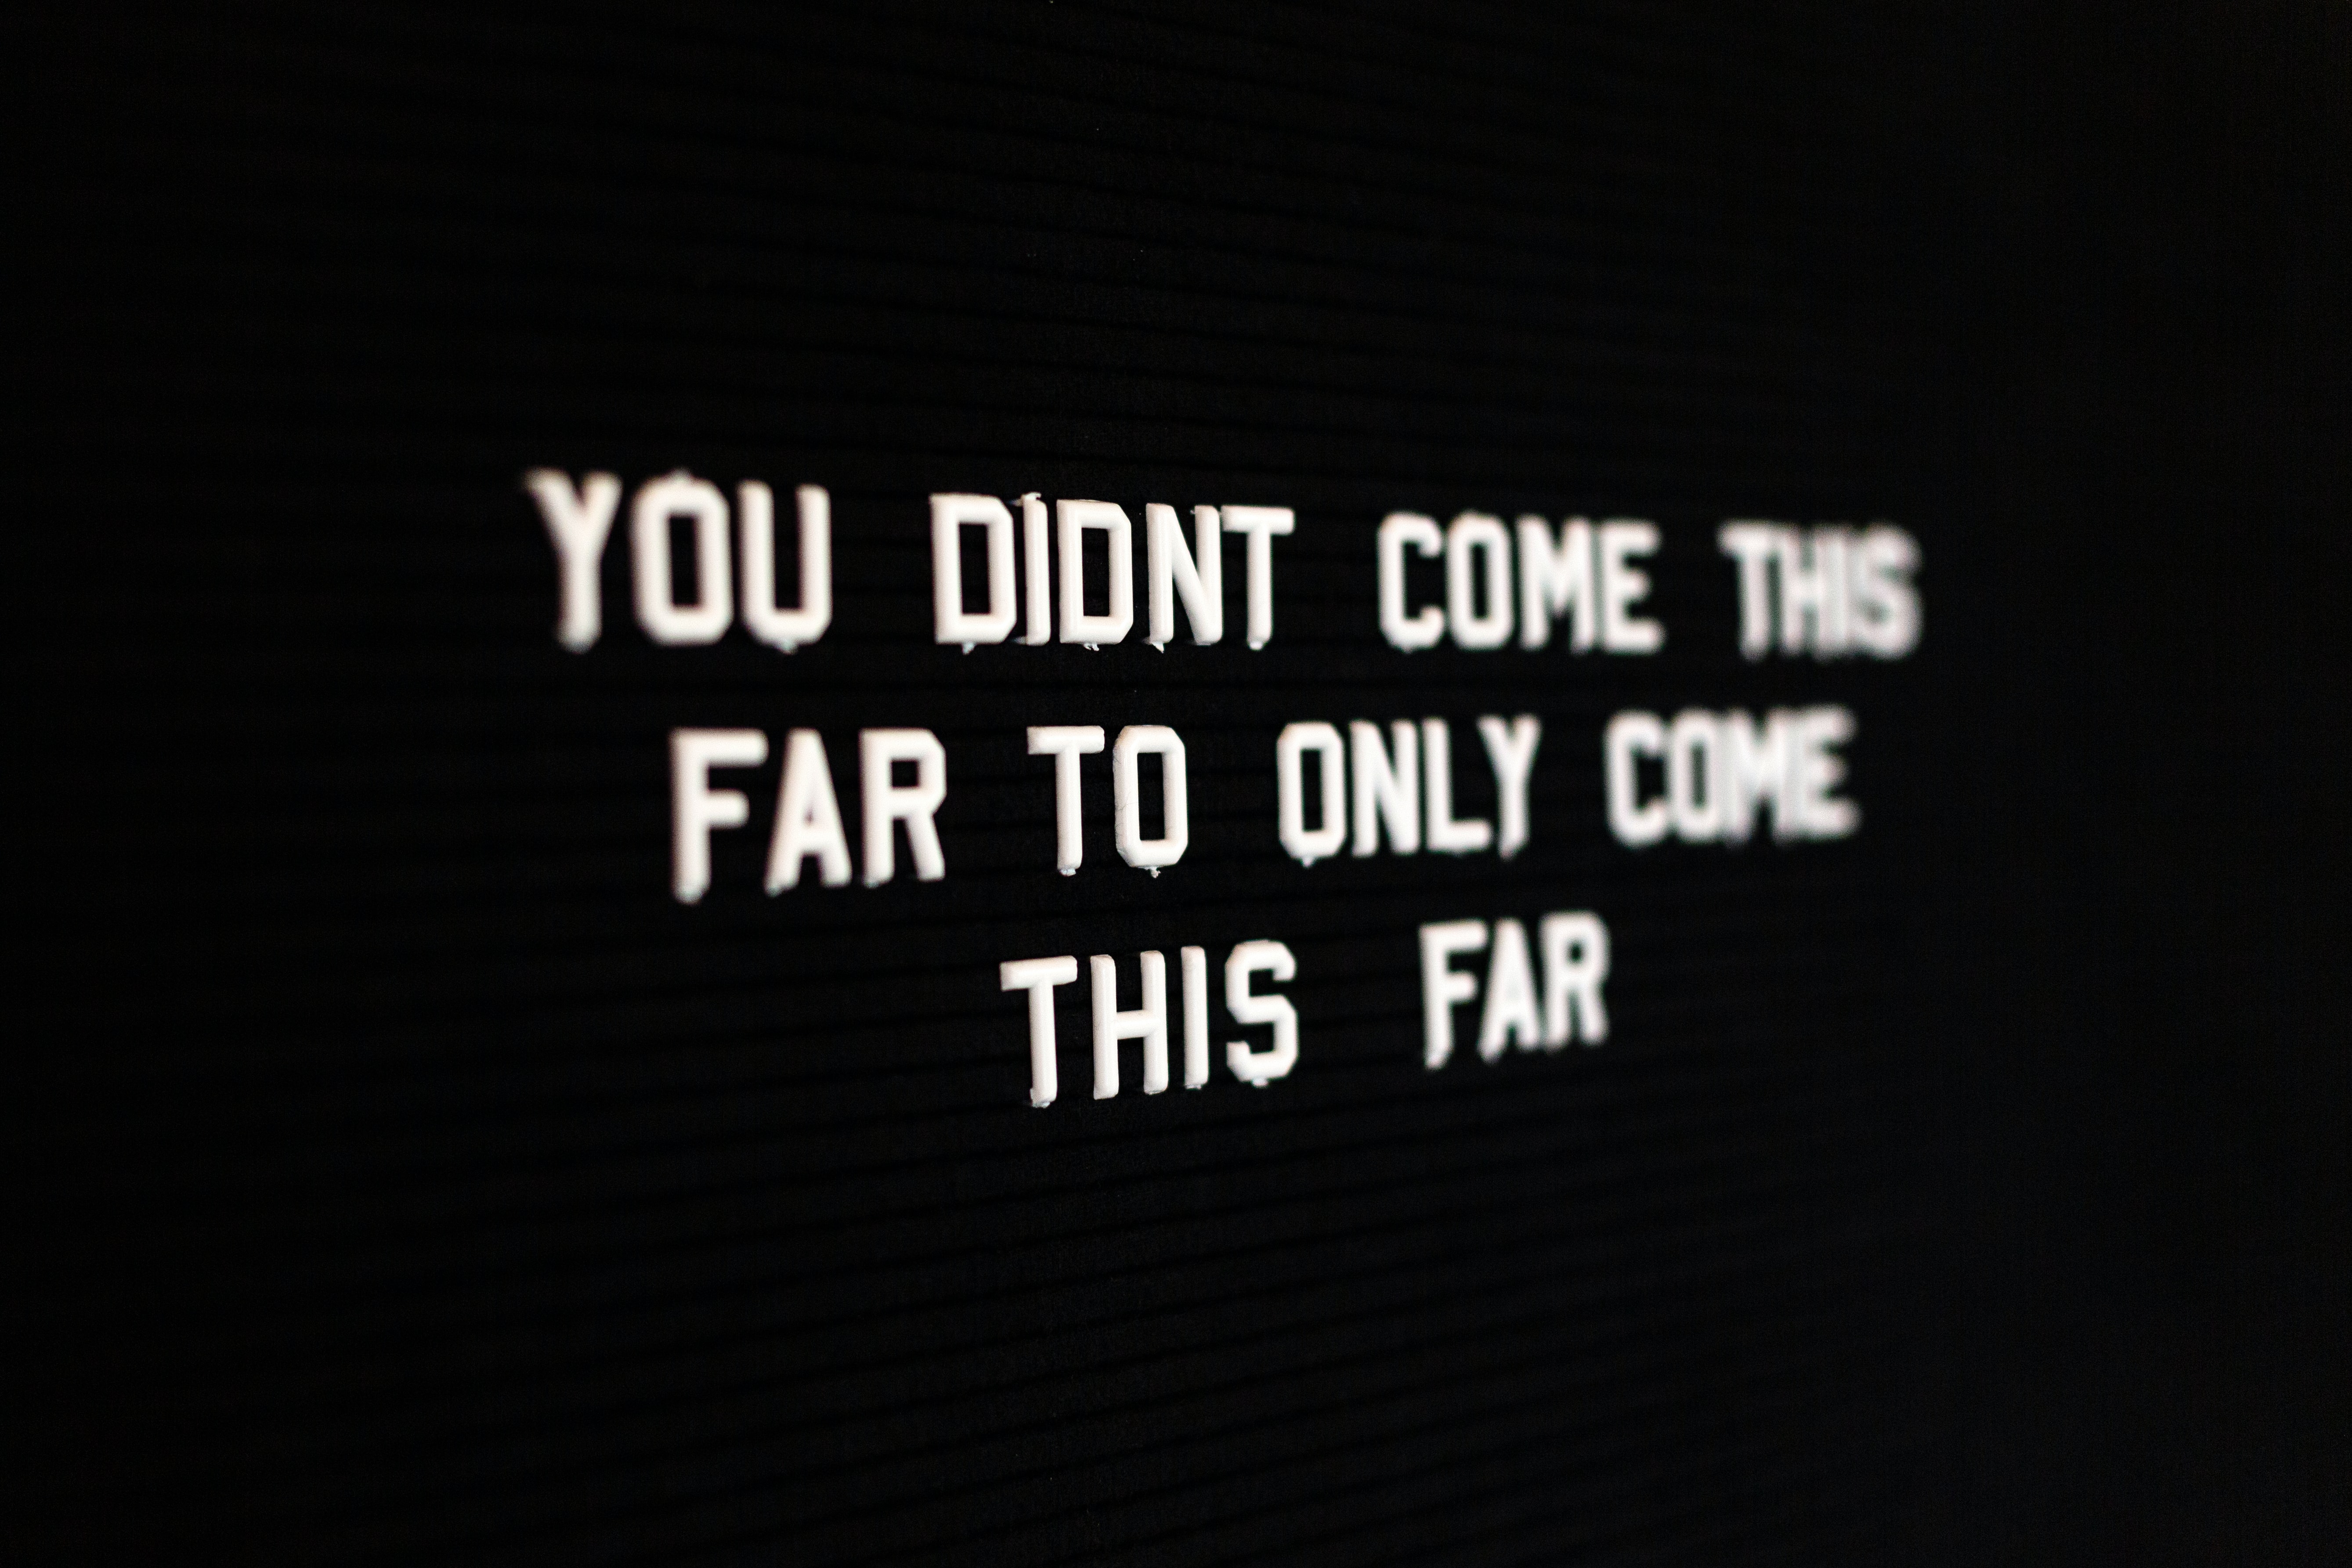 A quote that says you didn’t come this far to only come this far.